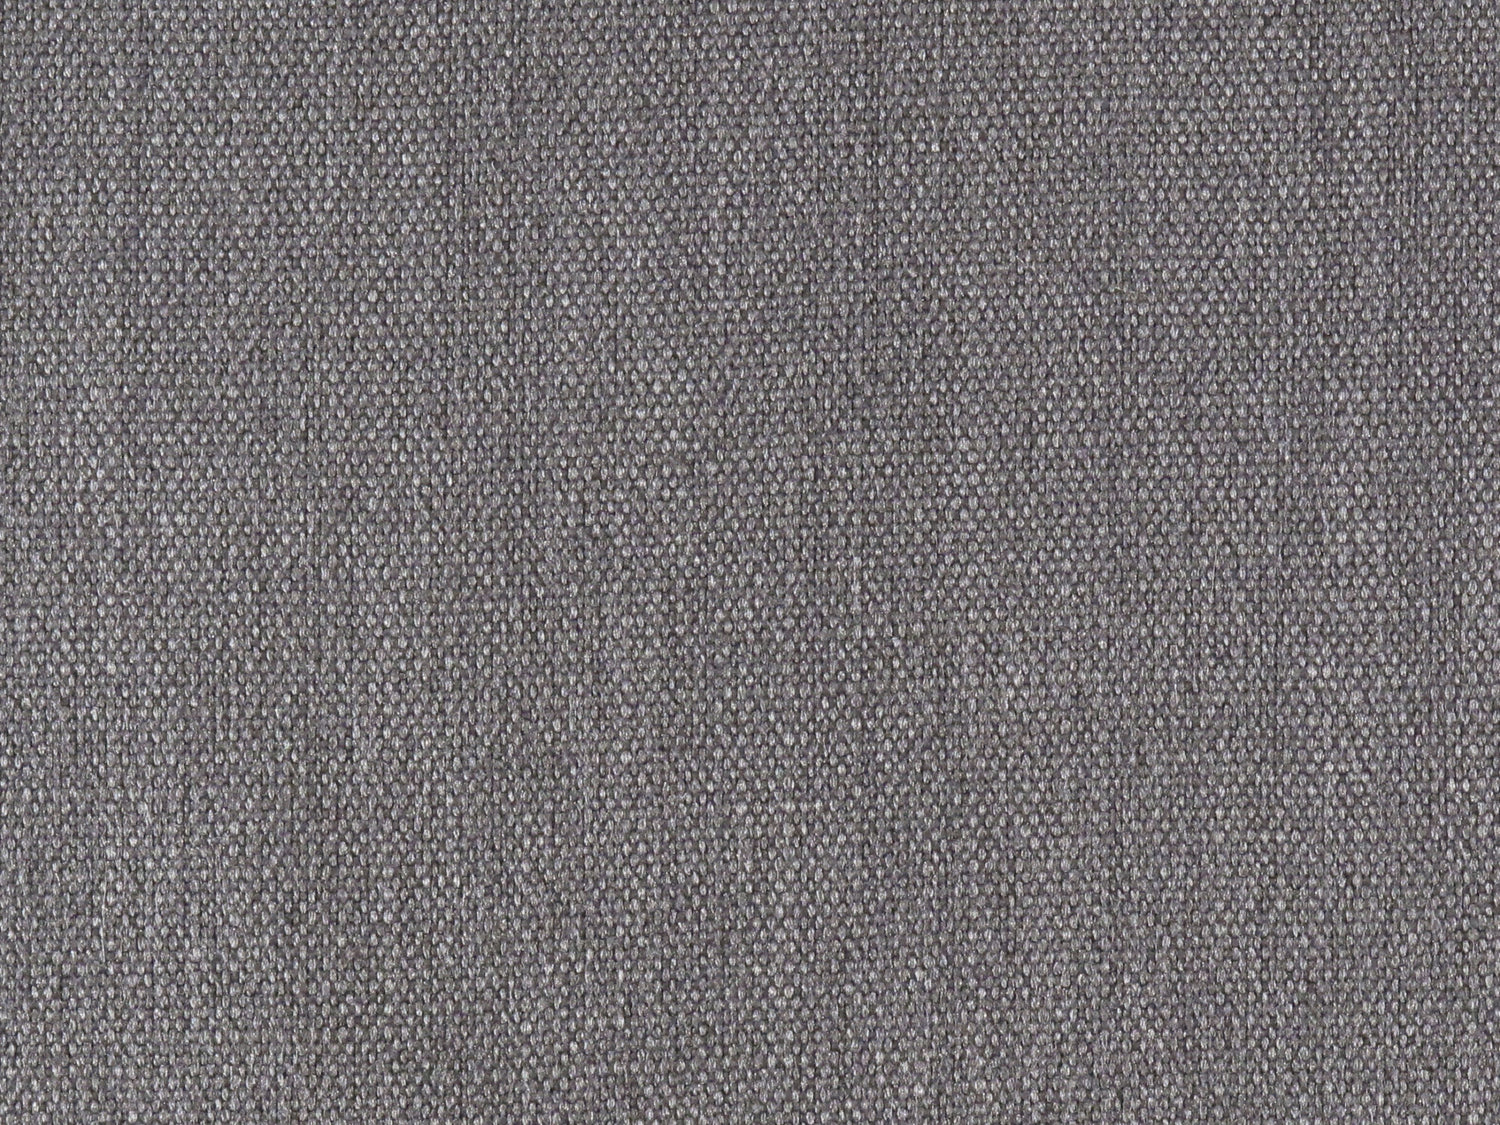 Lakeside Linen fabric in slate color - pattern number PK 0010LAKE - by Scalamandre in the Old World Weavers collection